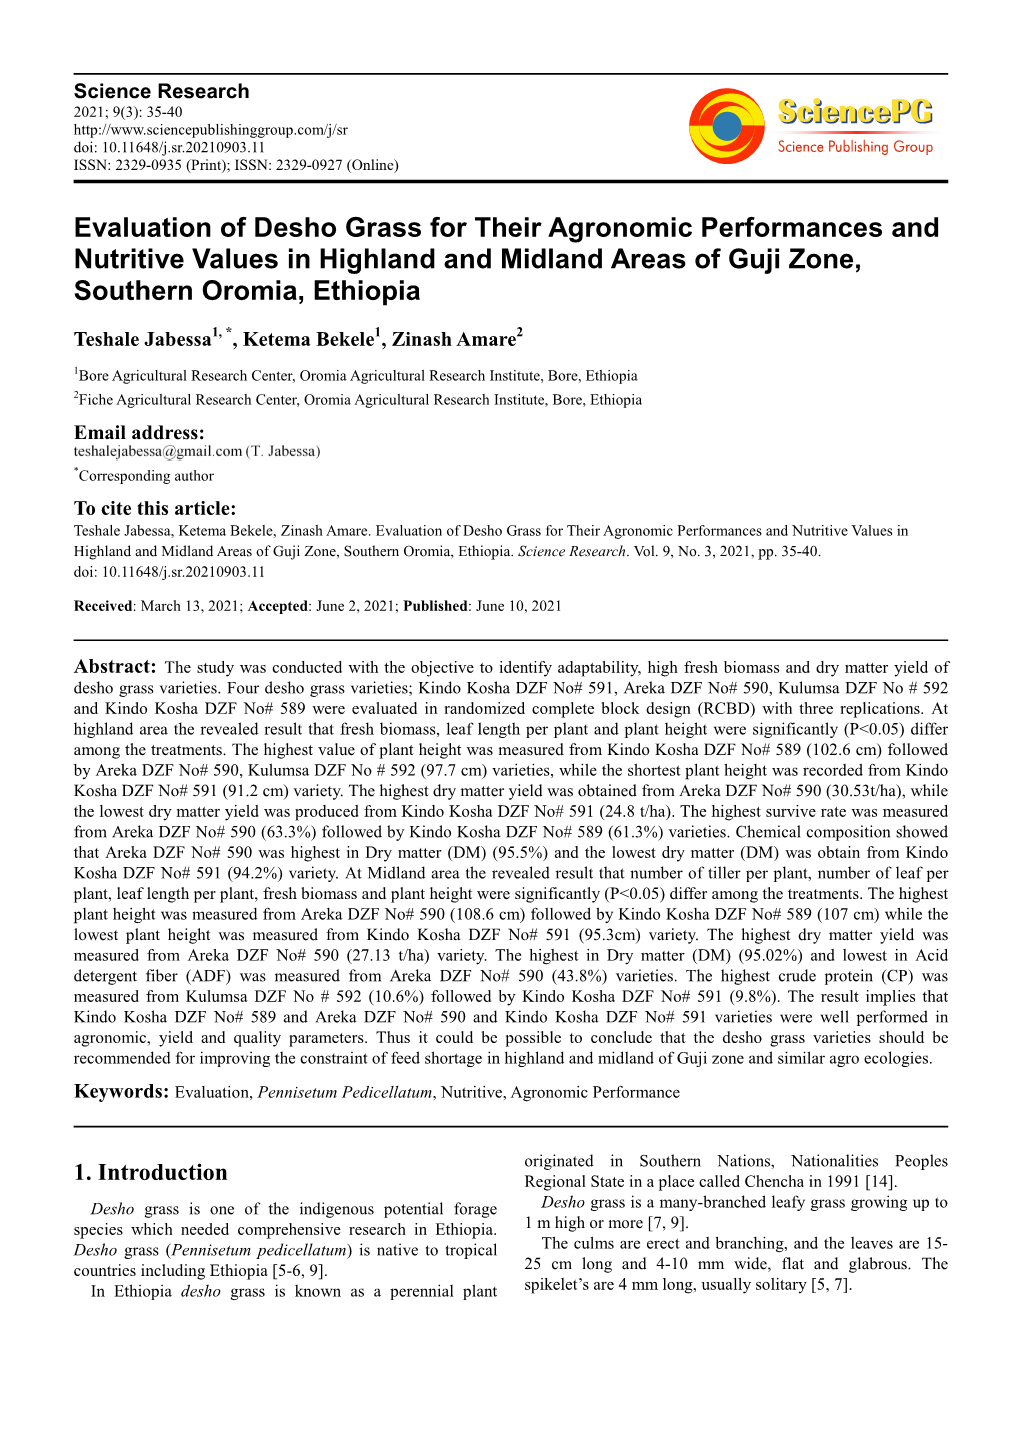 Evaluation of Desho Grass for Their Agronomic Performances and Nutritive Values in Highland and Midland Areas of Guji Zone, Southern Oromia, Ethiopia